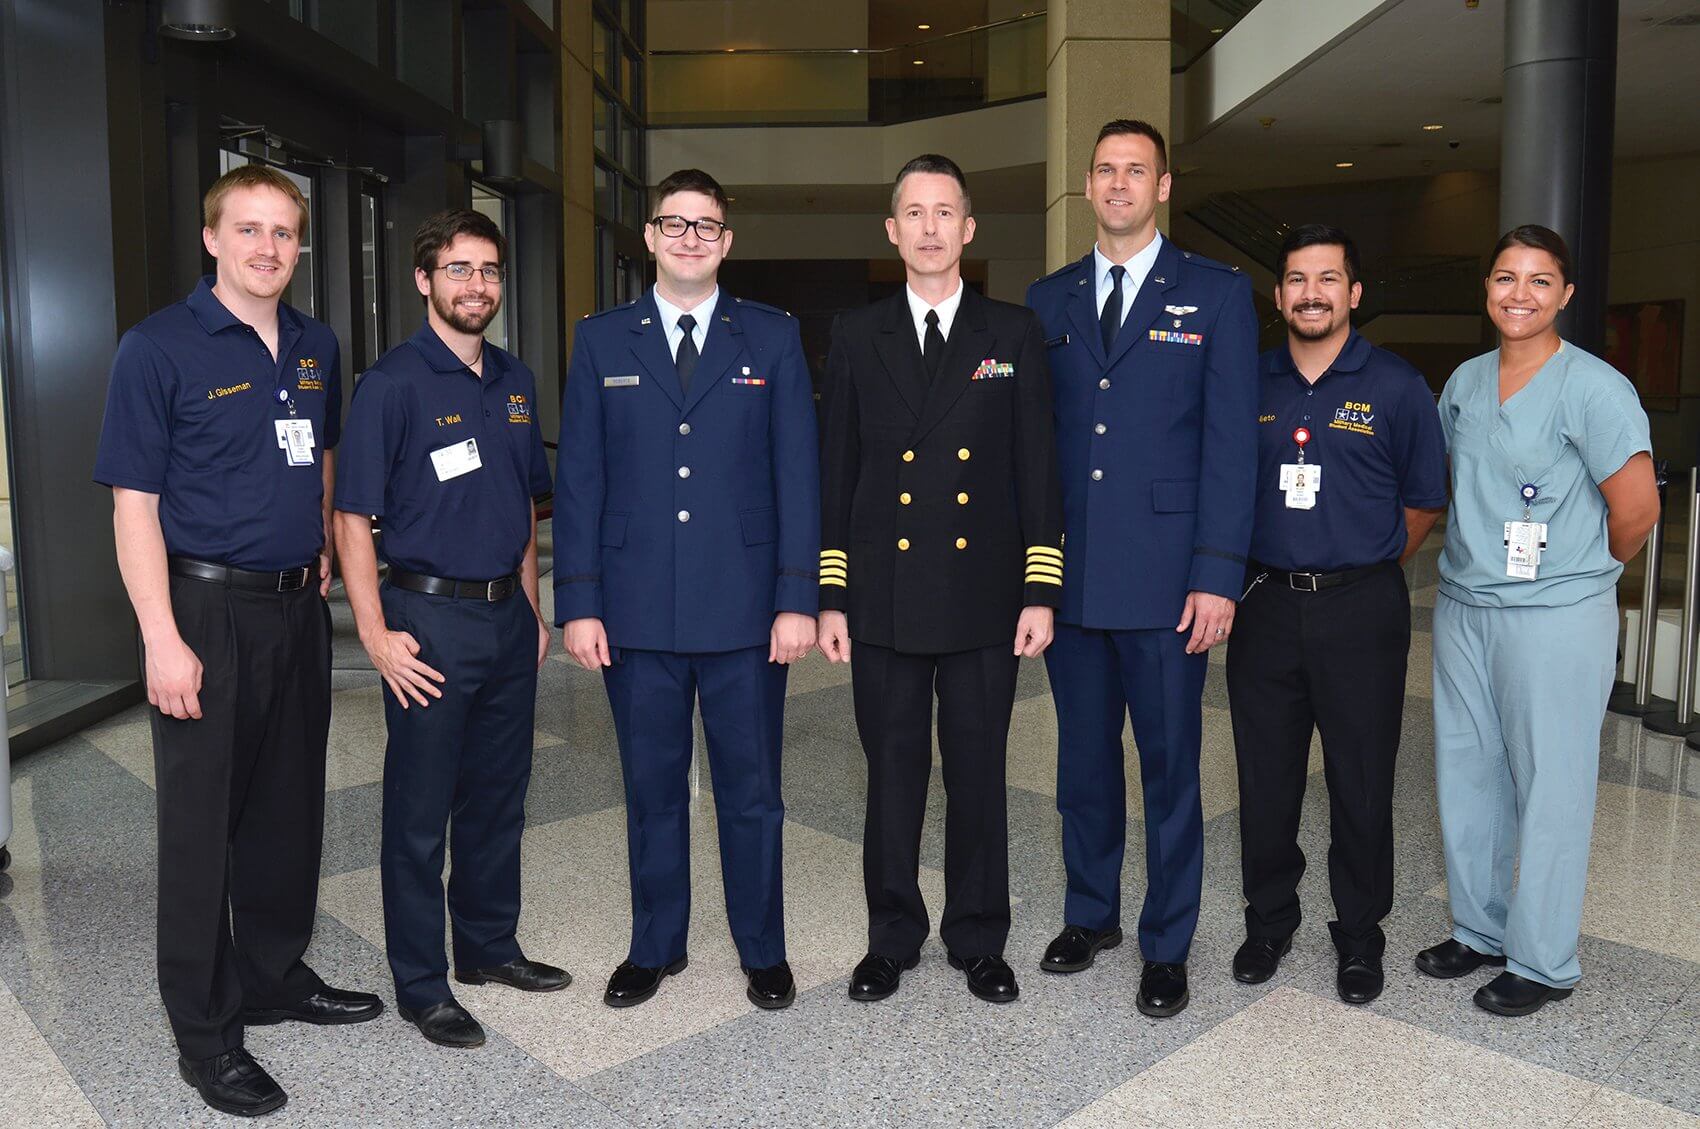 Air Force Capts. Cecil Roberts, M.D., third from left, and Tim Soeken, M.D., third from right, were promoted during a commissioning ceremony in the DeBakey Library and Museum. (Credit: Baylor College of Medicine)